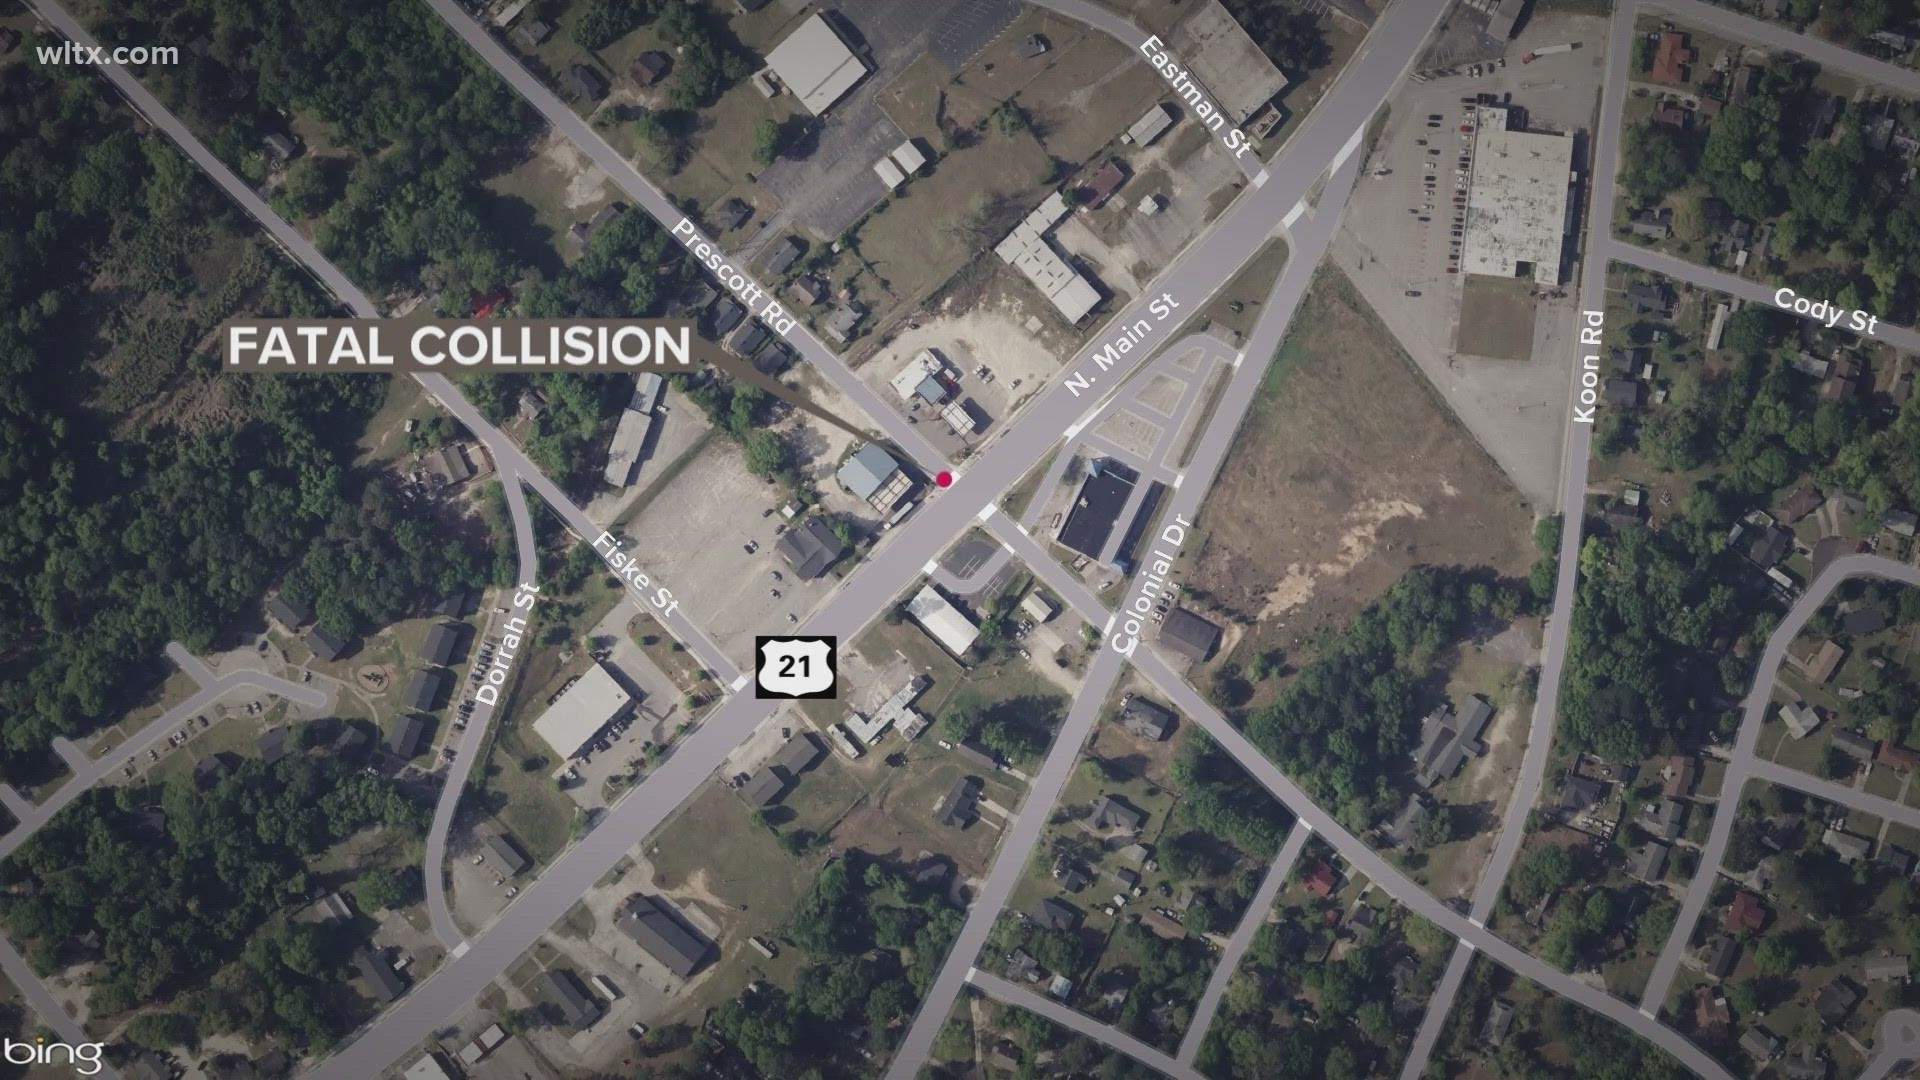 At the intersection of Main Street and Prescott Road, near the Obama gas station, a Columbia Police car and a Toyota collided, killing the driver of the Toyota.